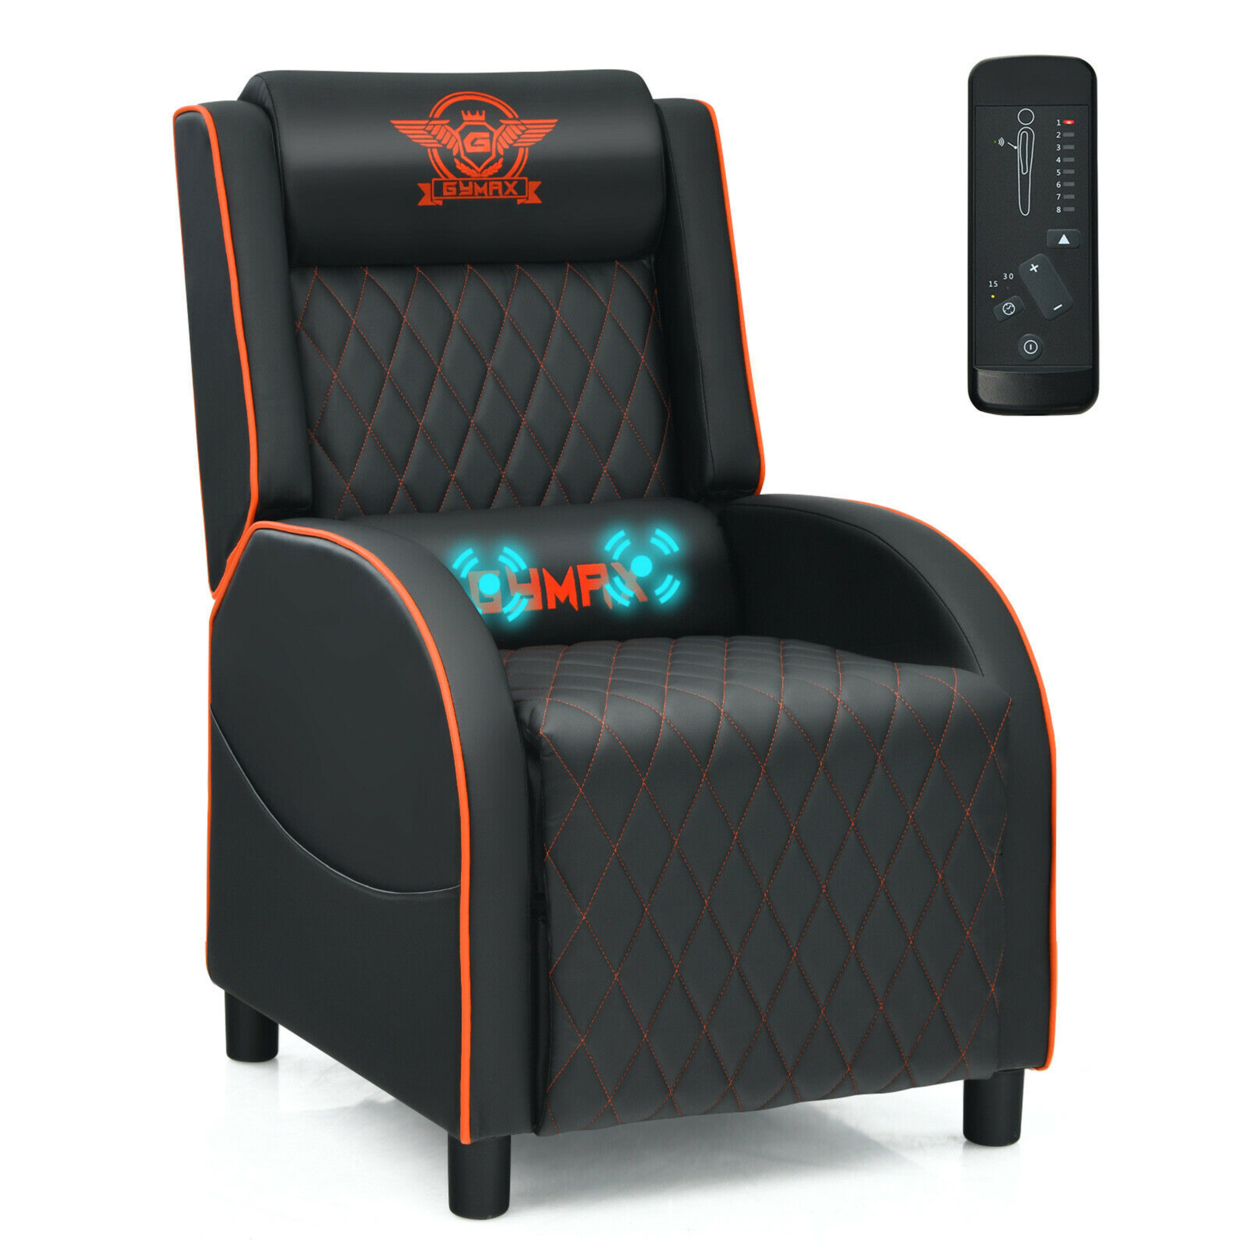 Massage Gaming Recliner Chair Leather Single Sofa Home Theater Seat - Orange